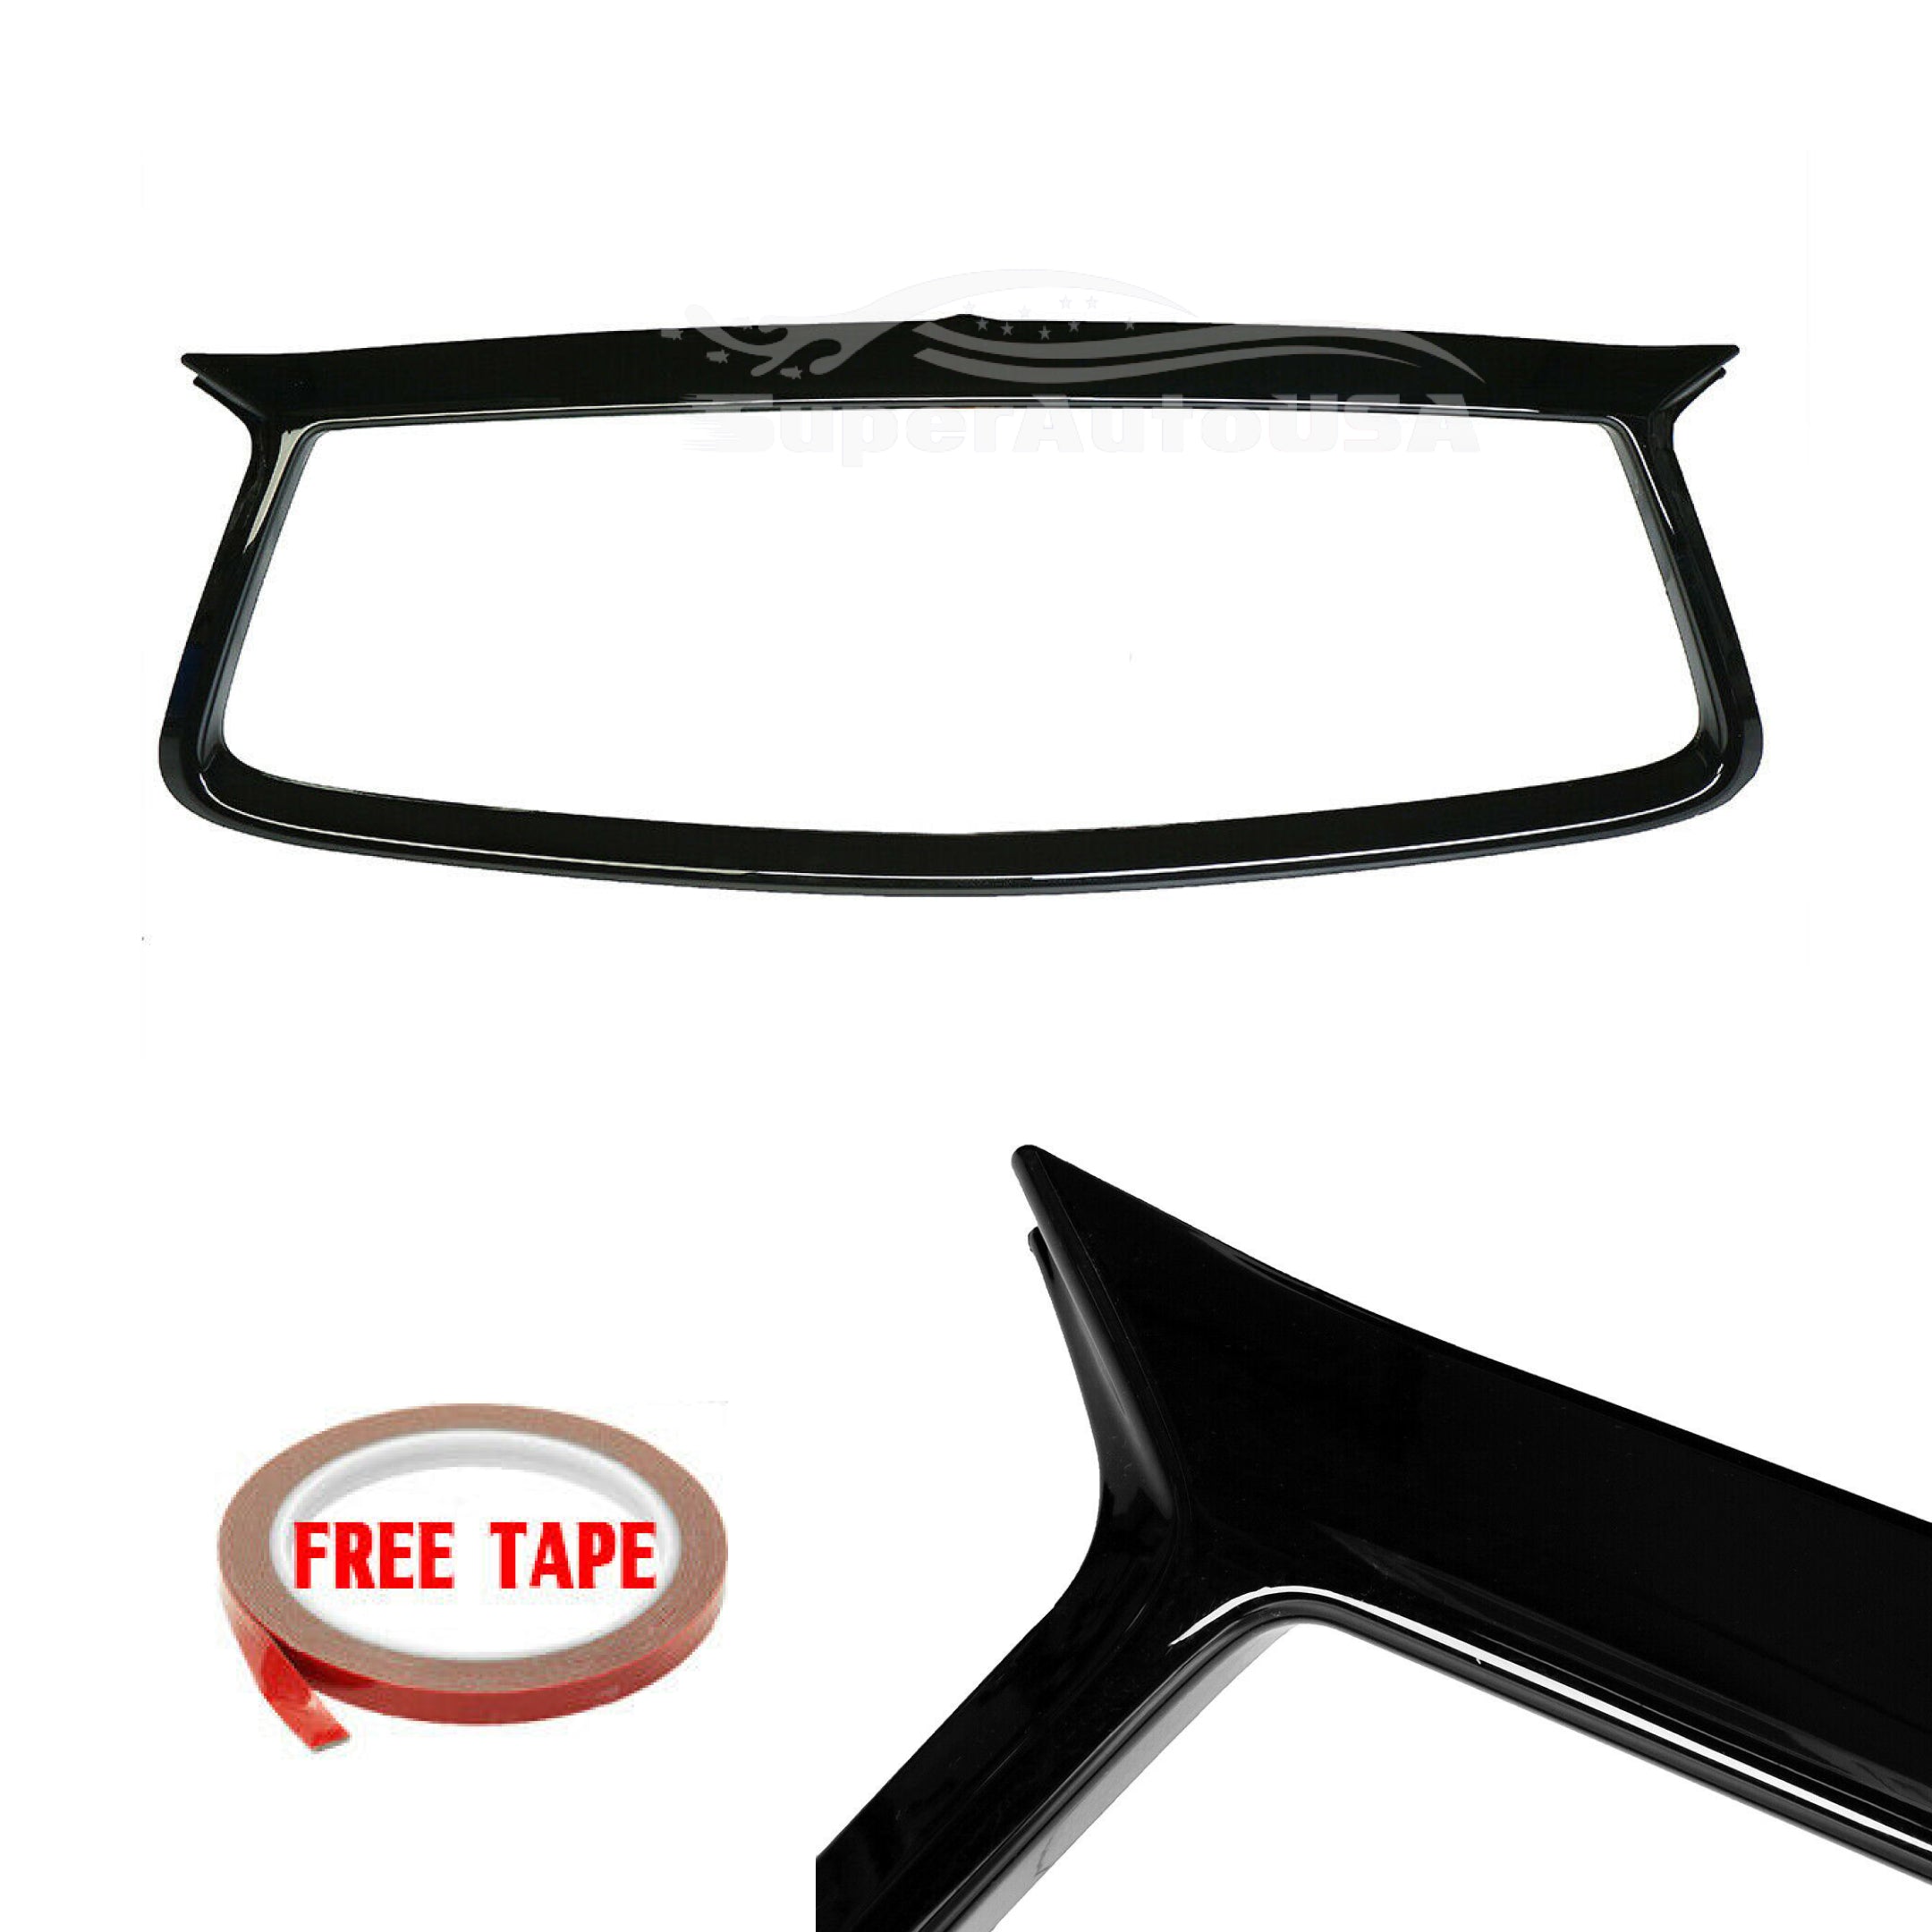 Fits 2017-2022 Q60 Front Grille Grill Outline Trim Frame Cover (Gloss Black)